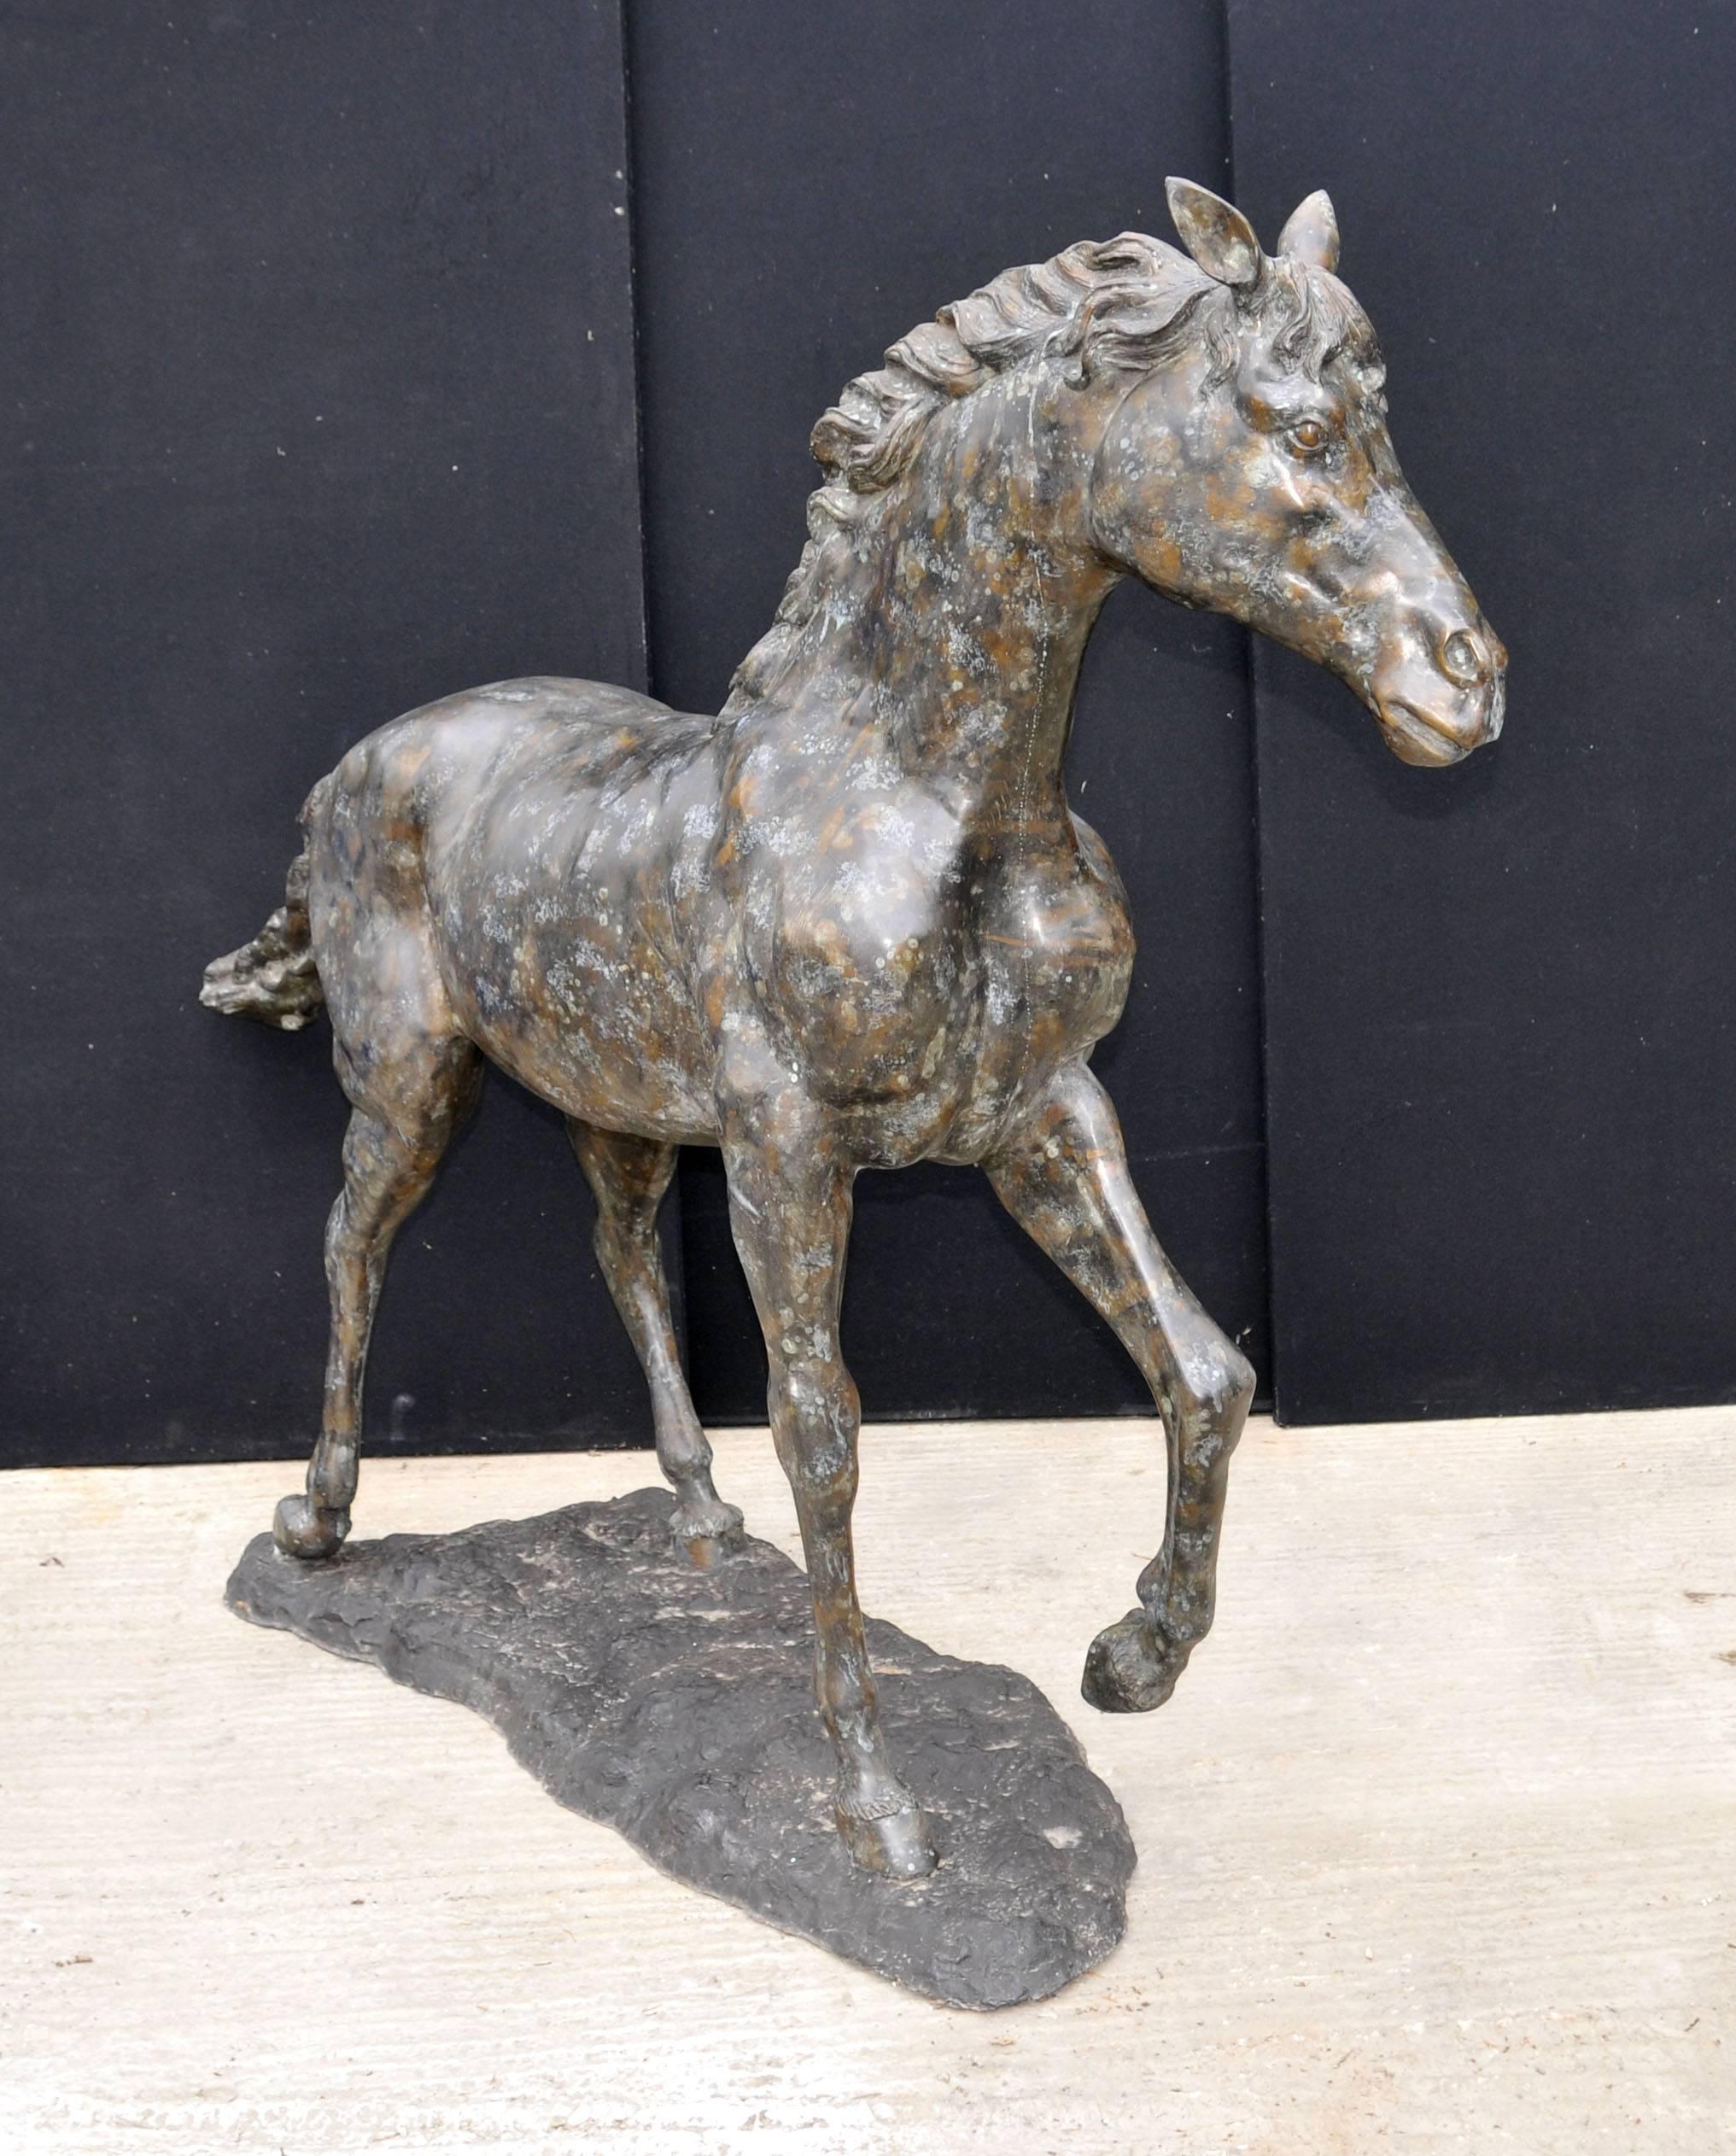 Gorgeous French bronze horse or pony statue.
Stands in at just over five feet (160 CM) tall so you could call this lifesize as a pony.
Love the patina to the verdis gris bronze with dappled brown, white and grey affects against the 

horse's